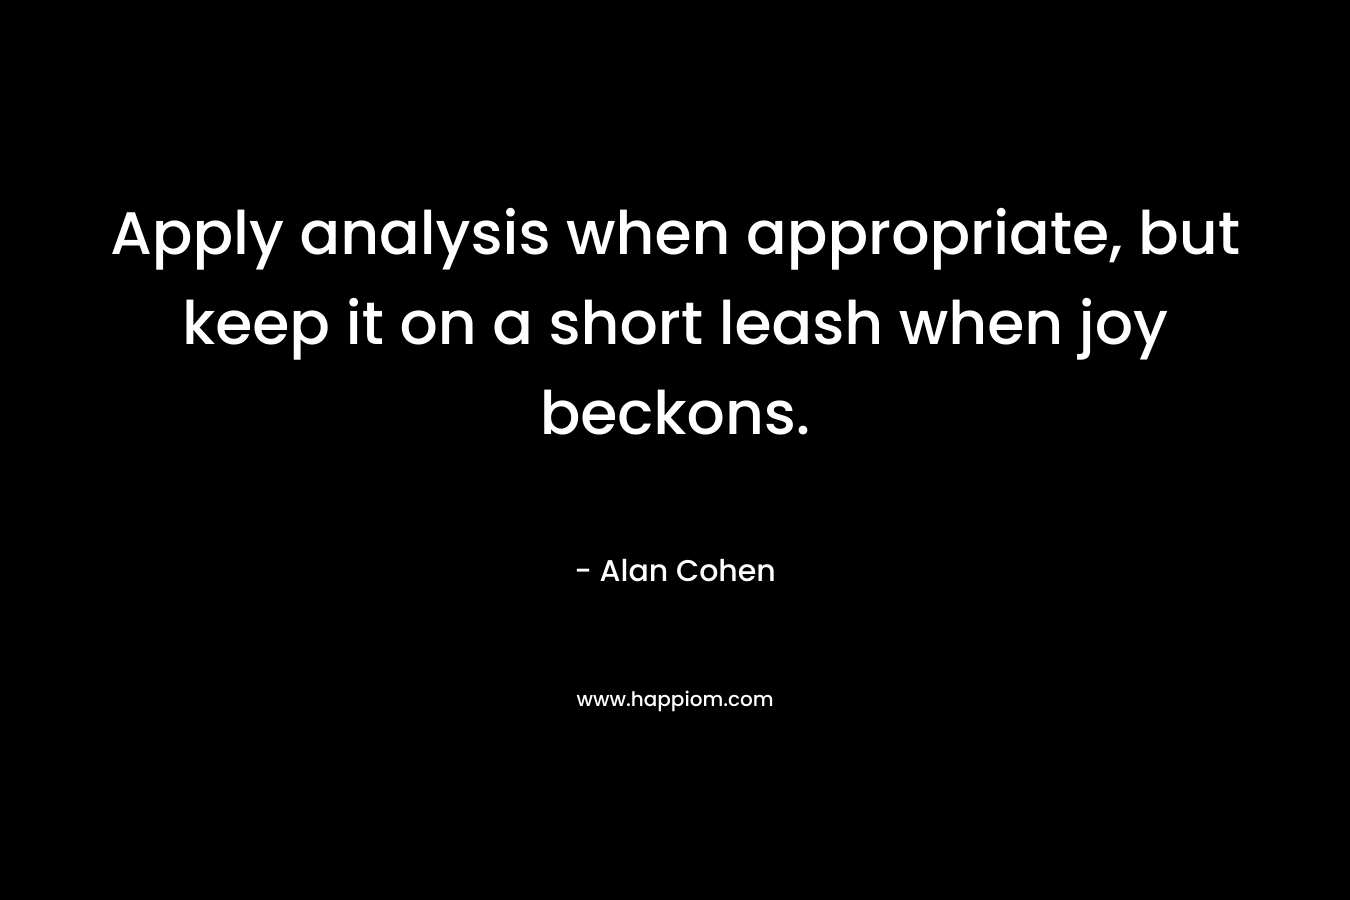 Apply analysis when appropriate, but keep it on a short leash when joy beckons. – Alan Cohen